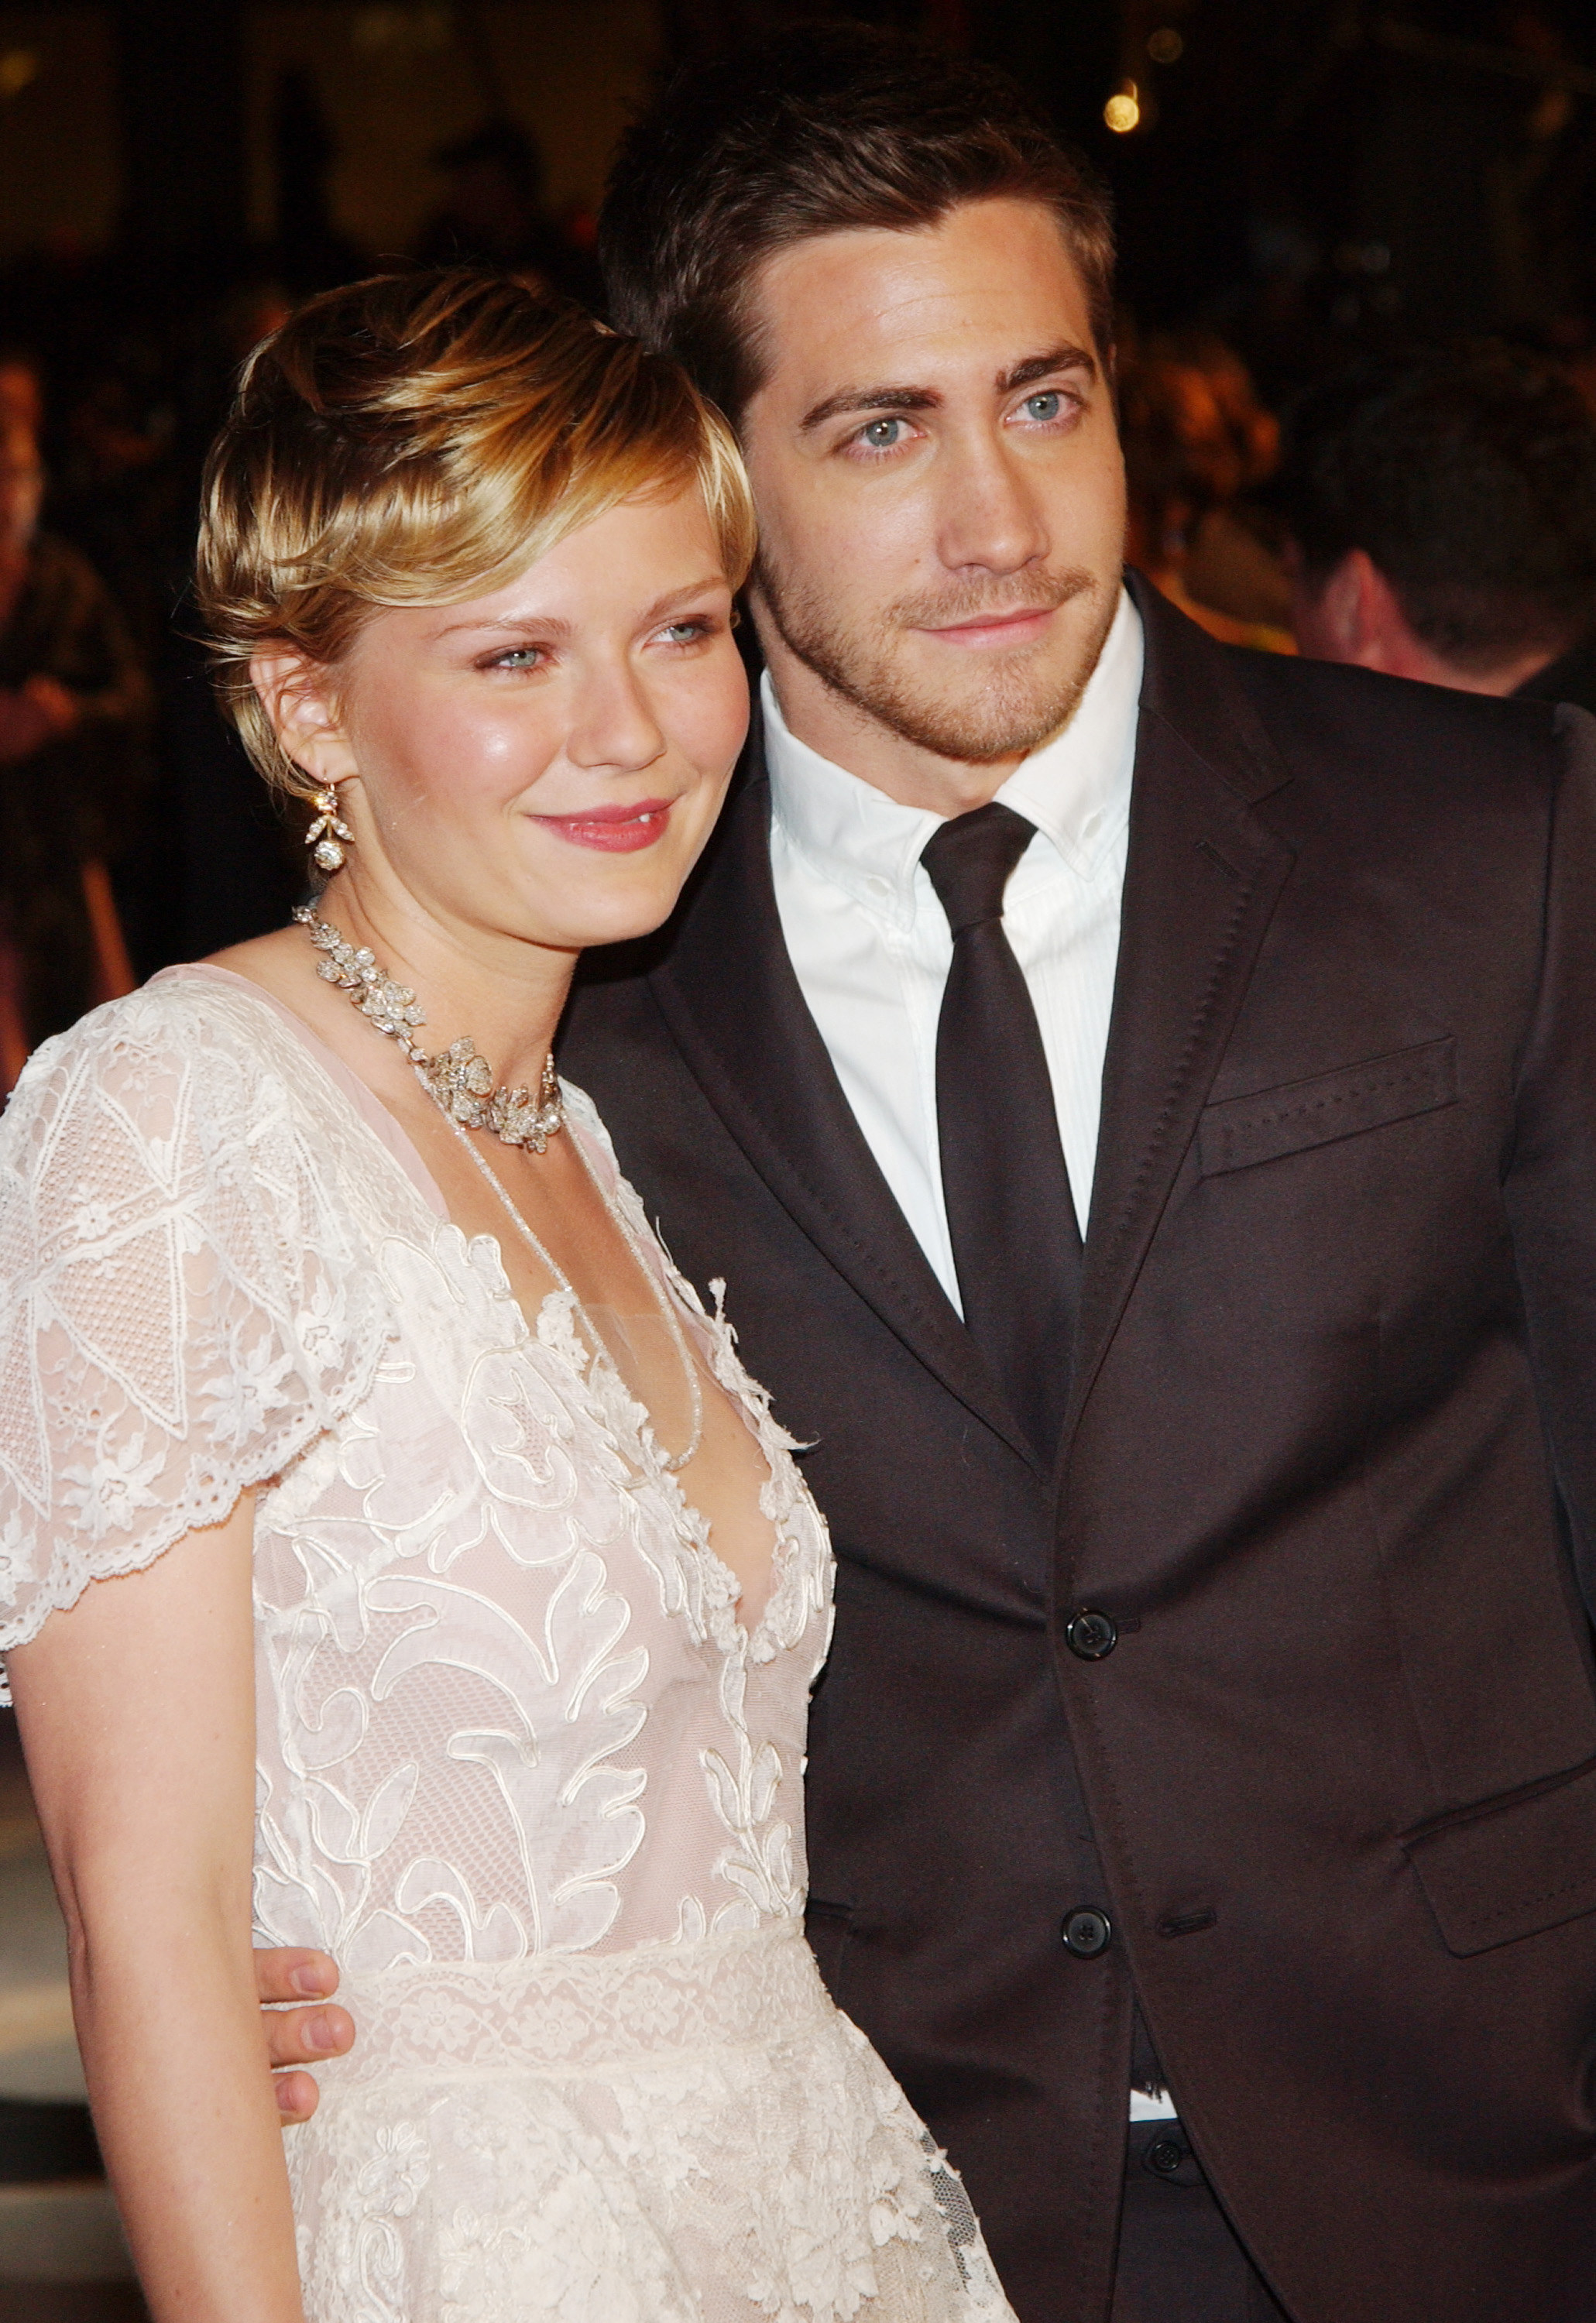 Kristen Dunst in a lace dress and Jake Gyllenhaal with their arms around each other at the 2004 Vanity Fair Oscar Party